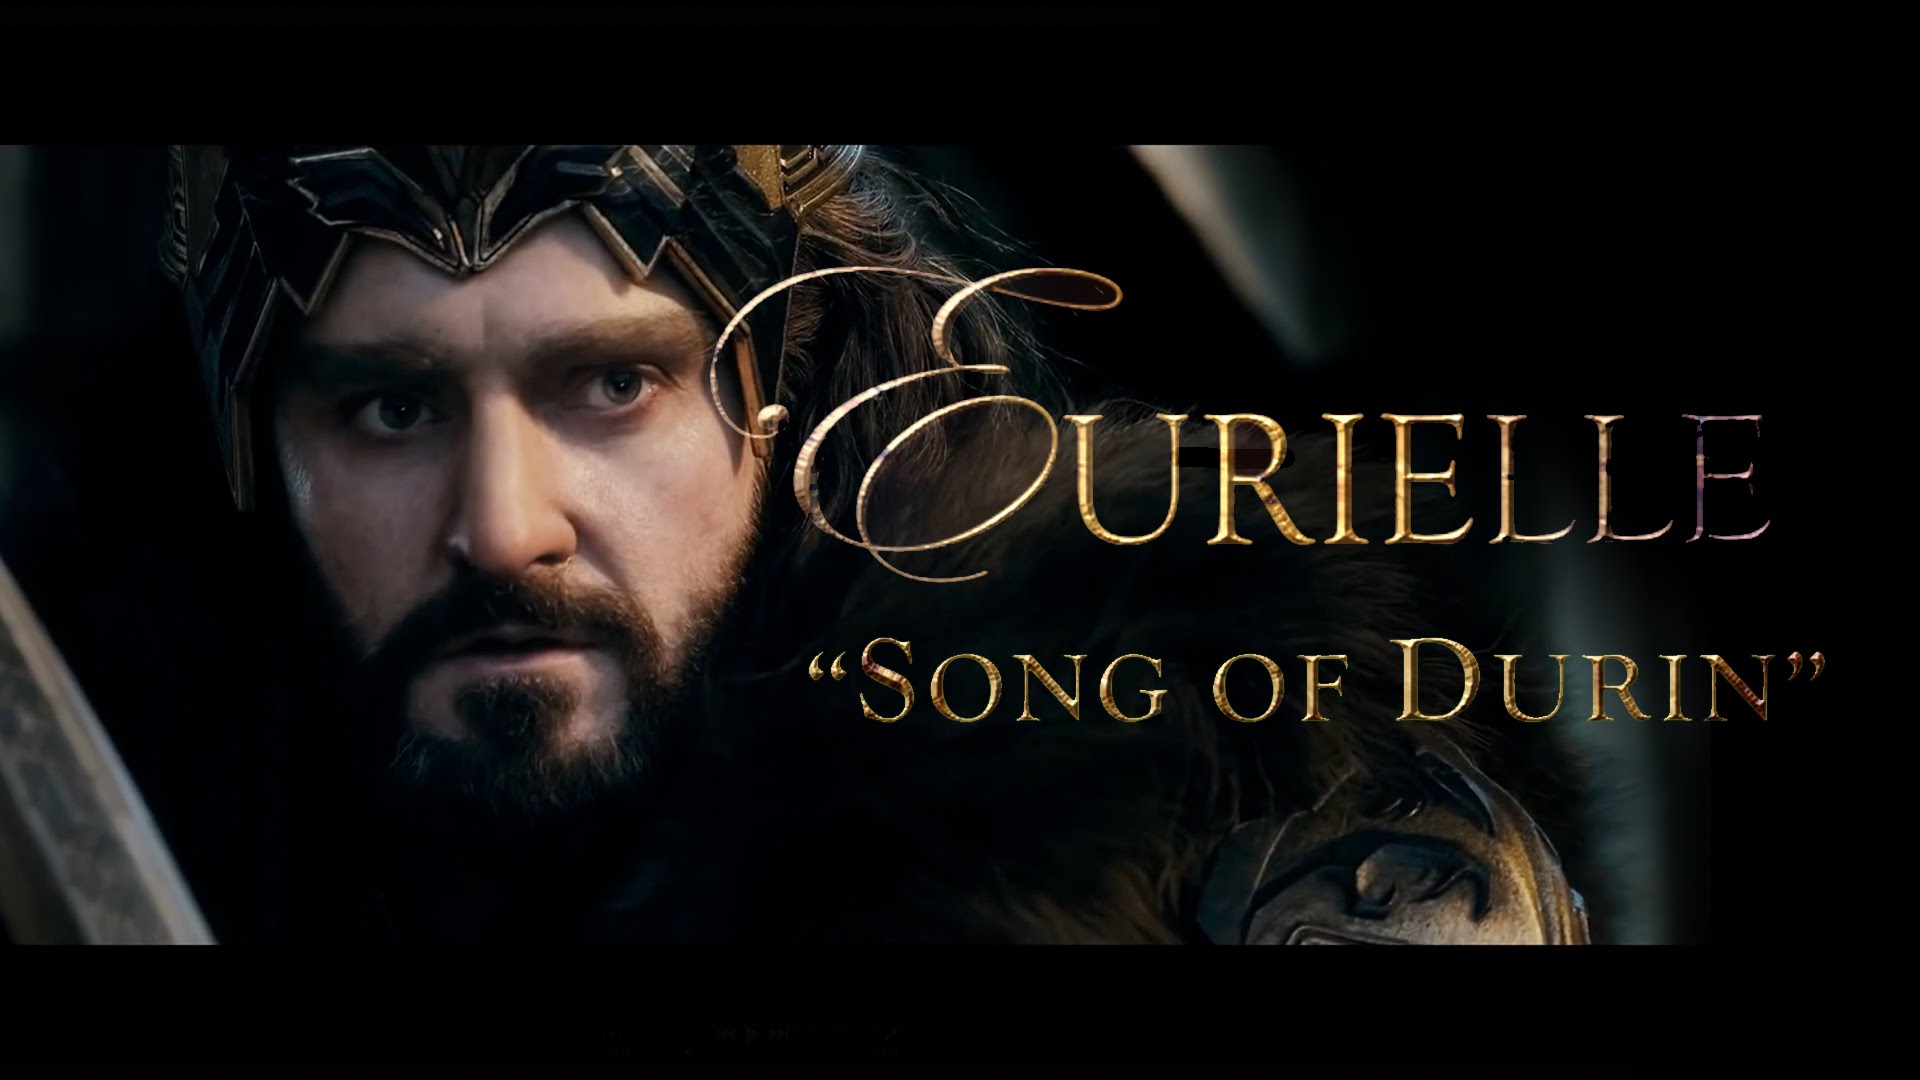 Eurielle - Song Of Durin (Lyrics from J.R.R Tolkien)